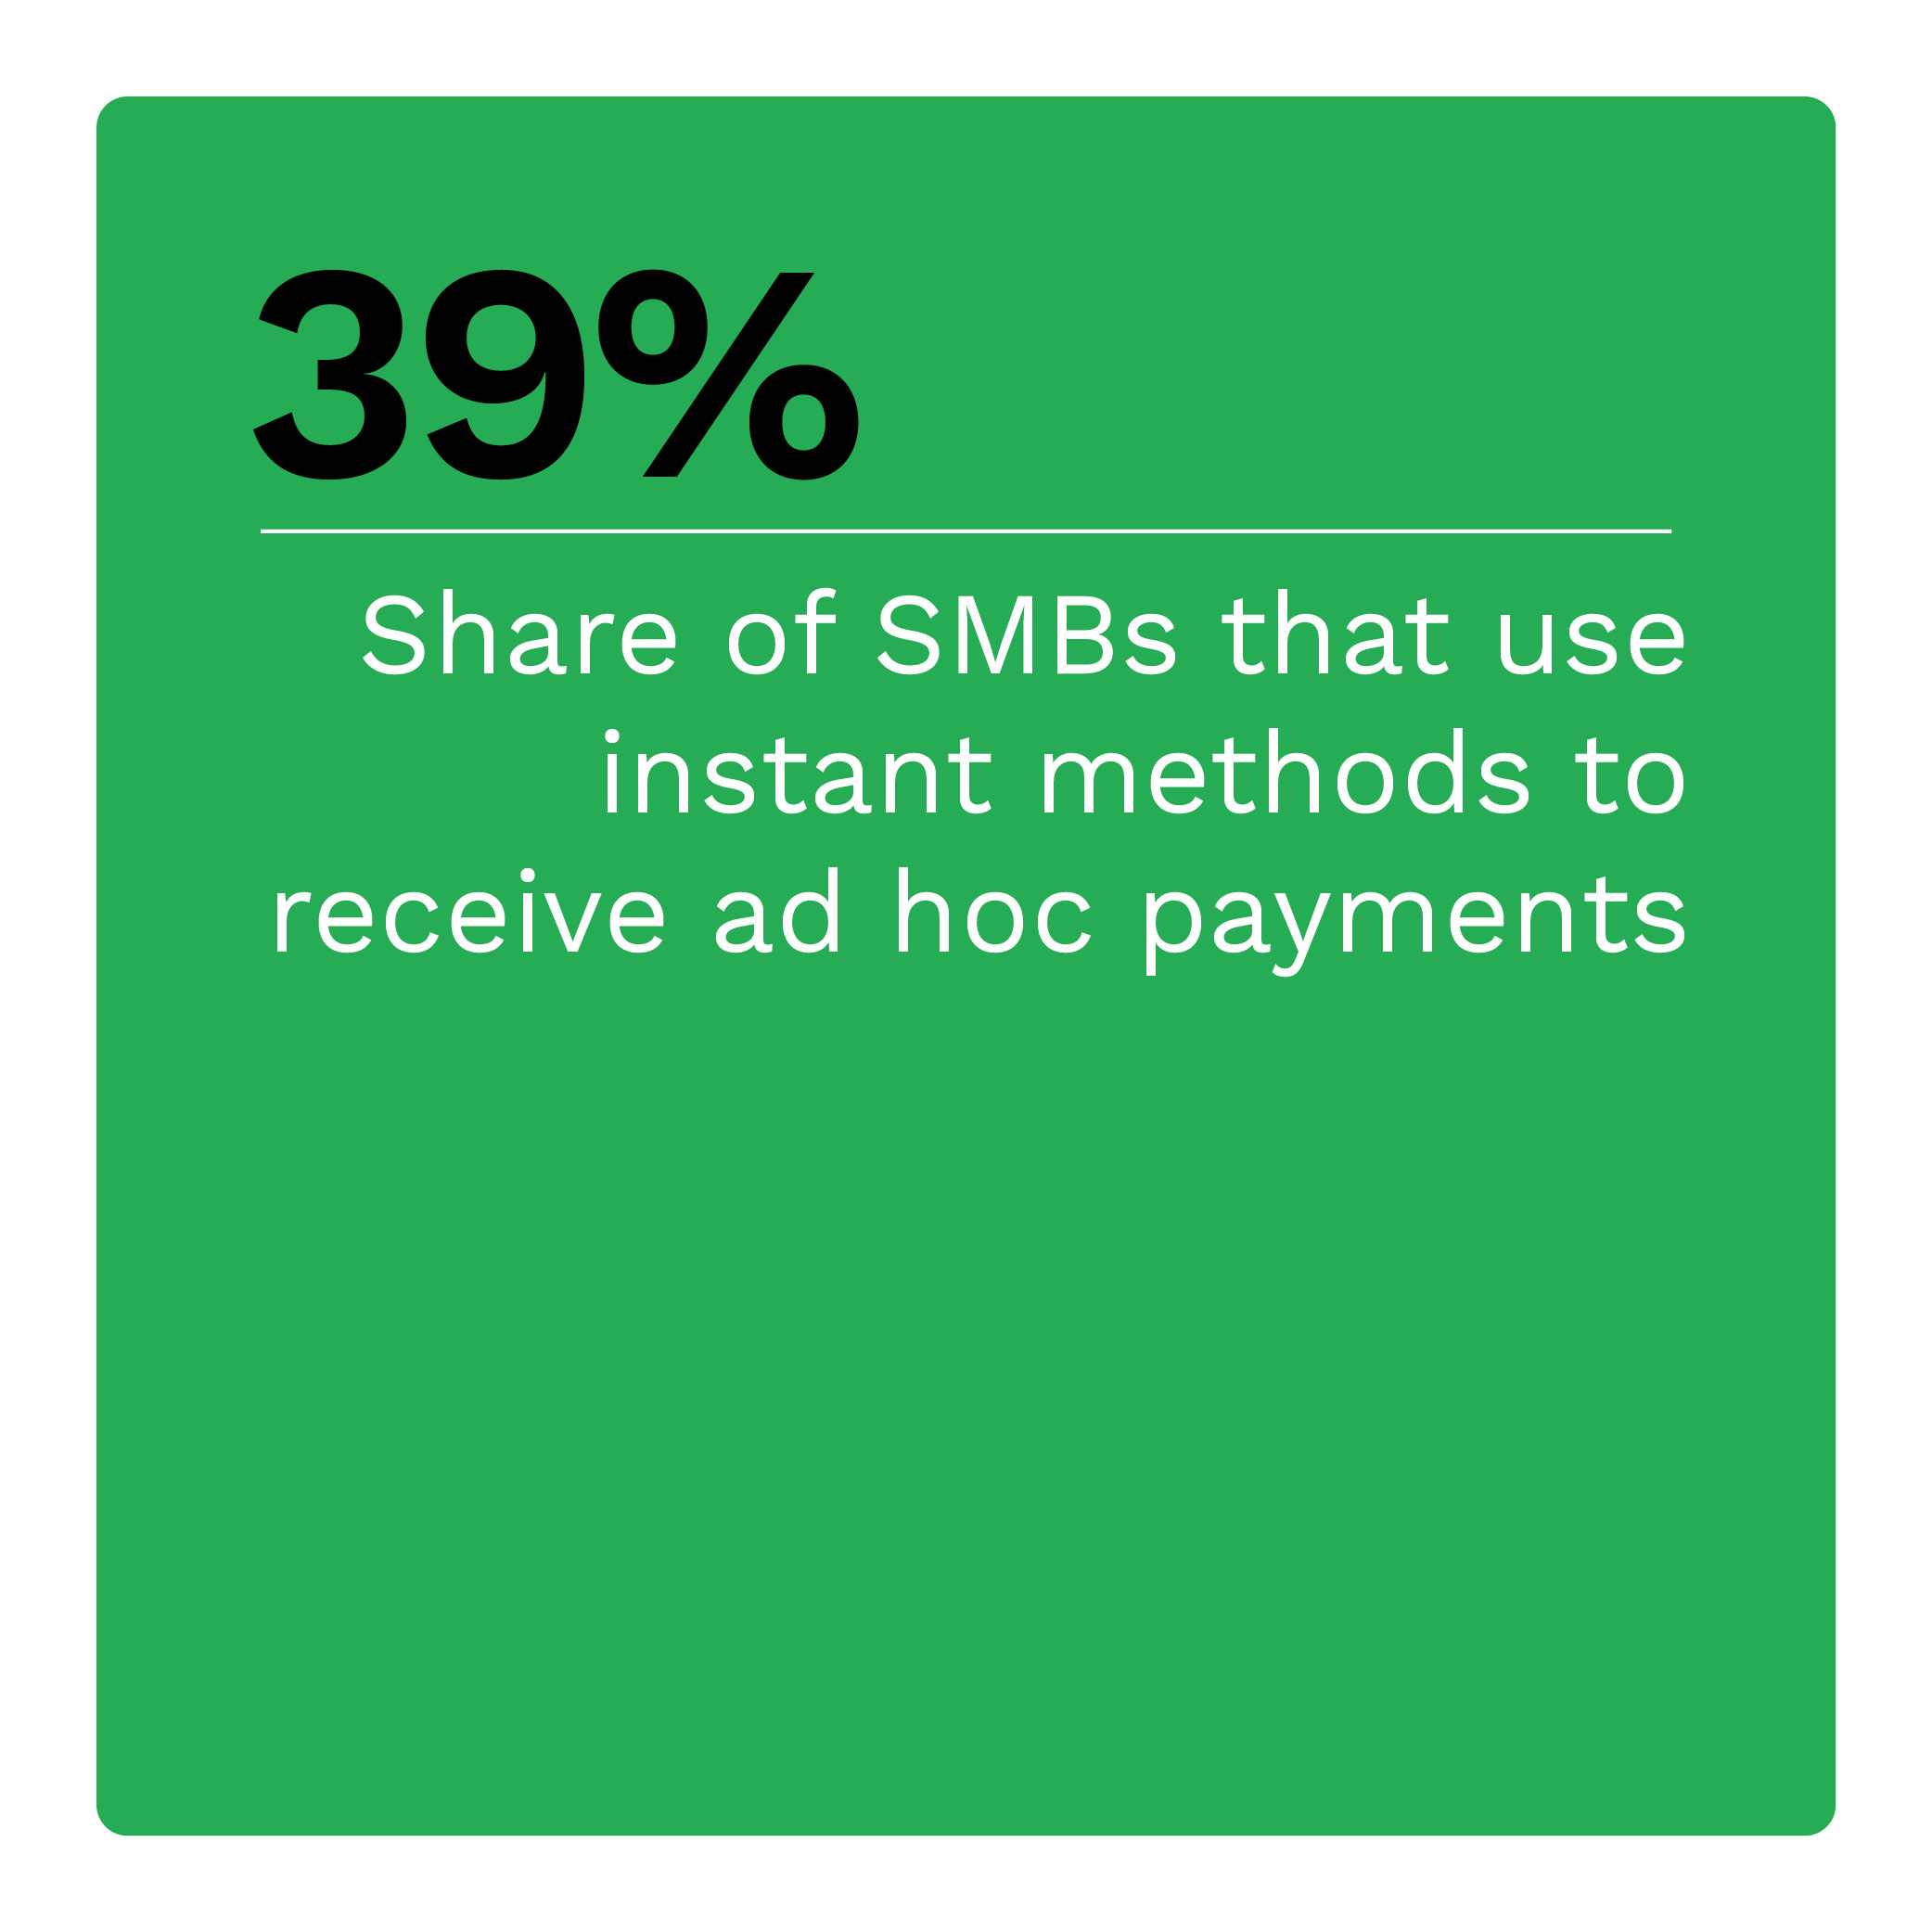 39%: Share of SMBs that use instant methods to receive ad hoc payments